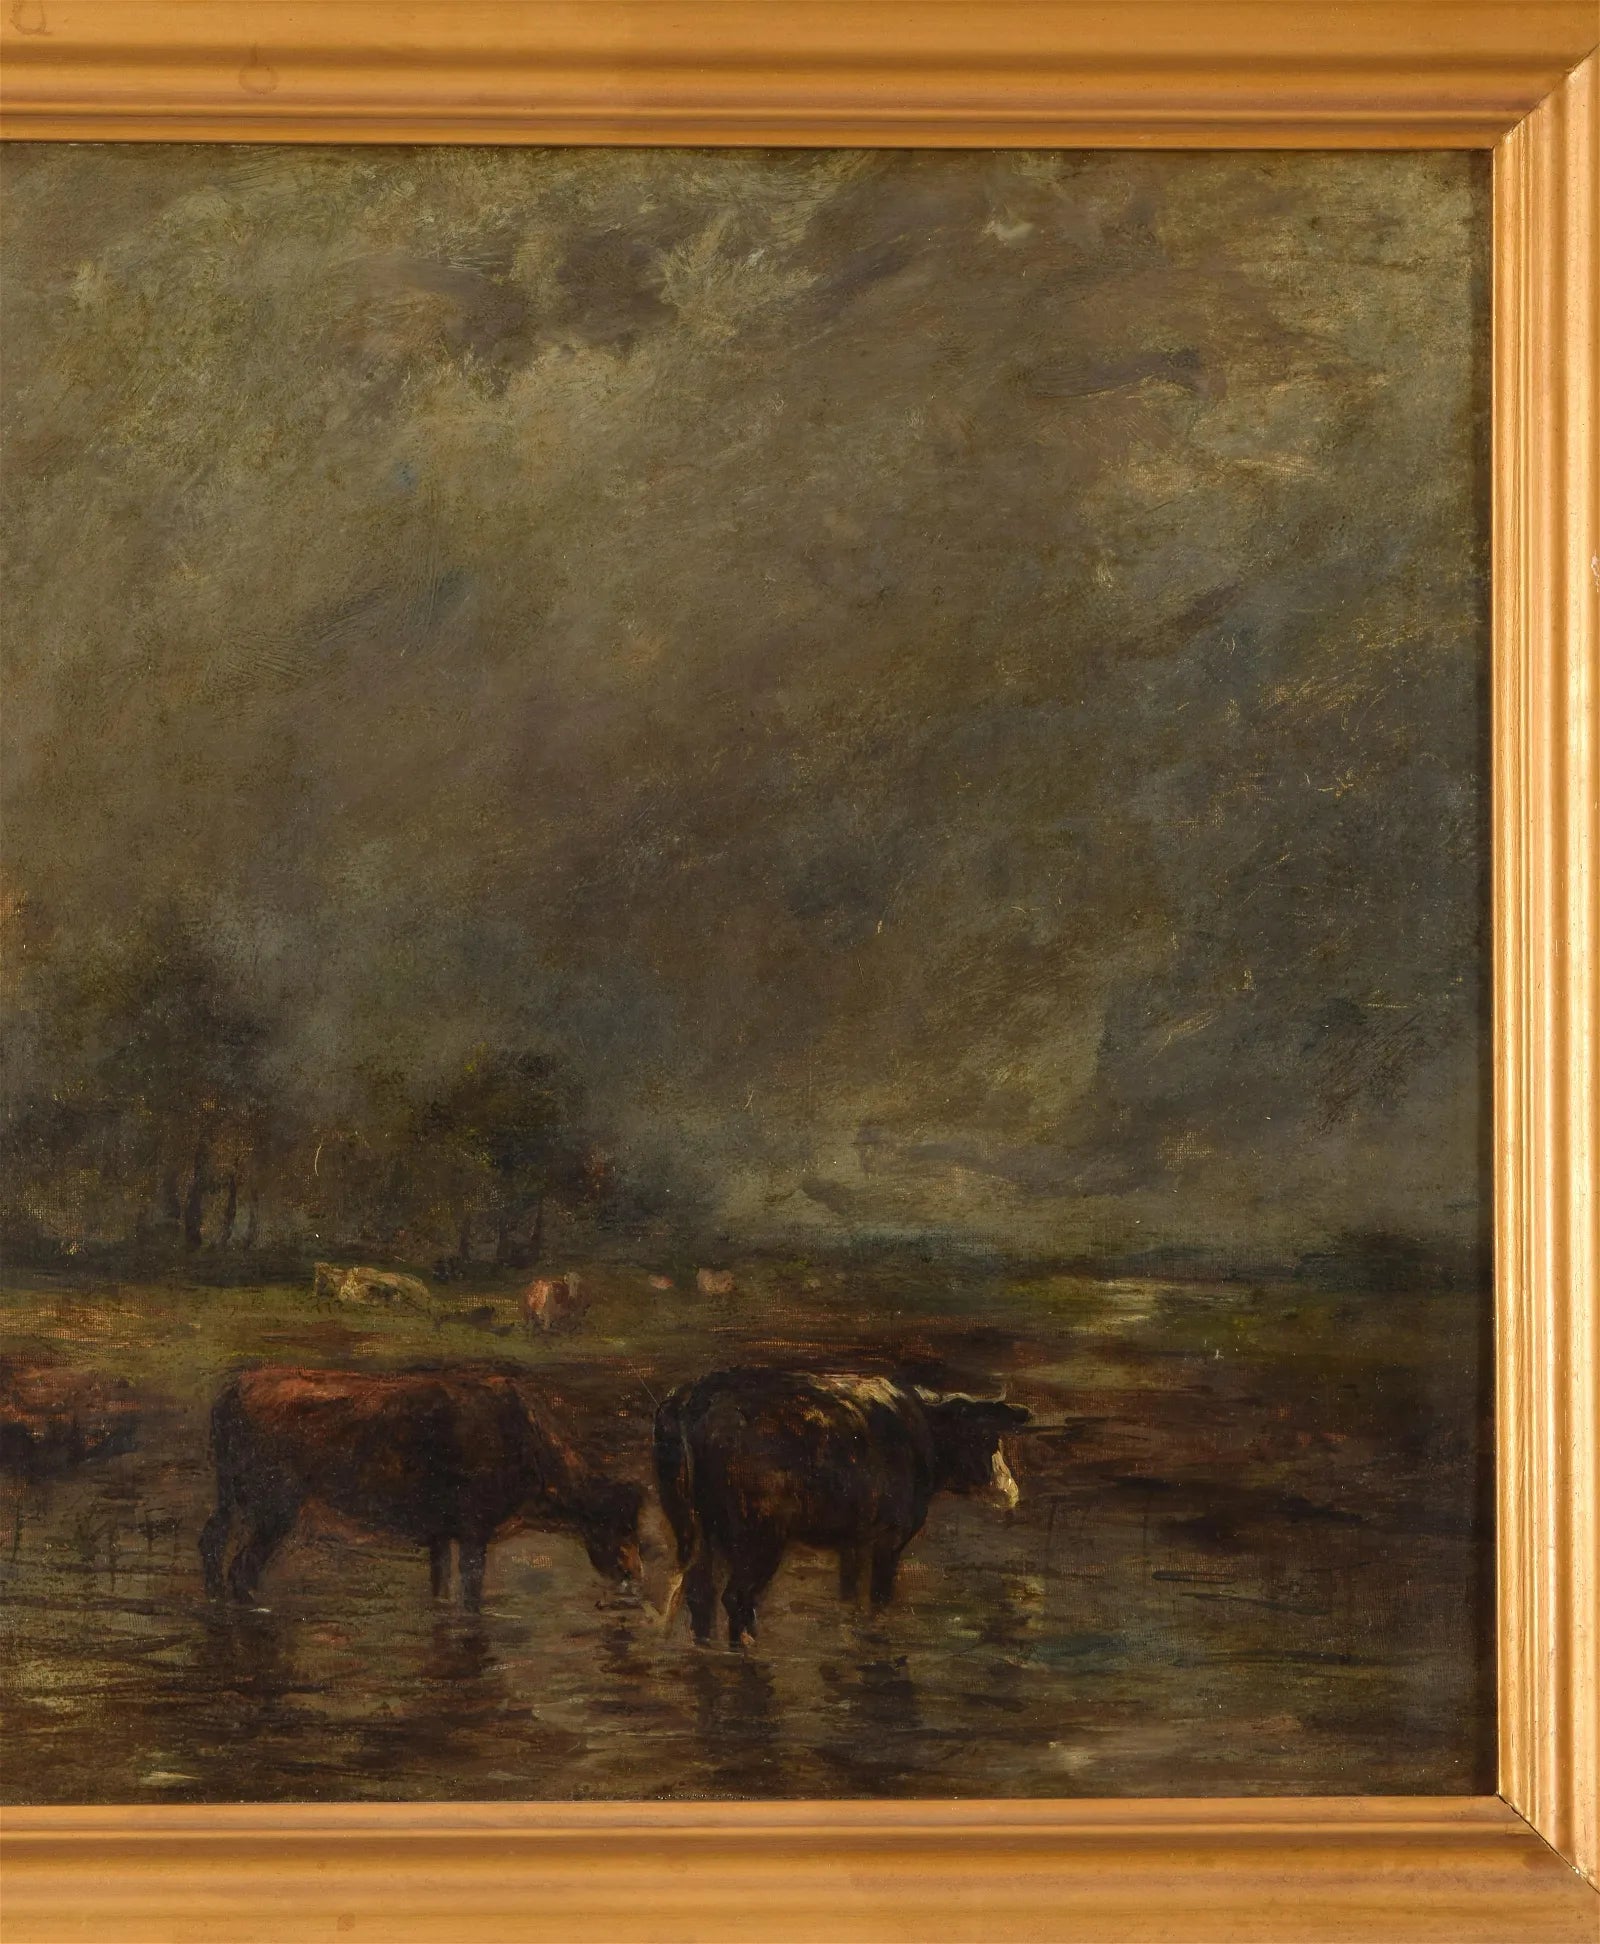 AW607: 19th Century Barbizon Landscape Attributed to Constant Troyon - Oil on Canvas Laid to Board